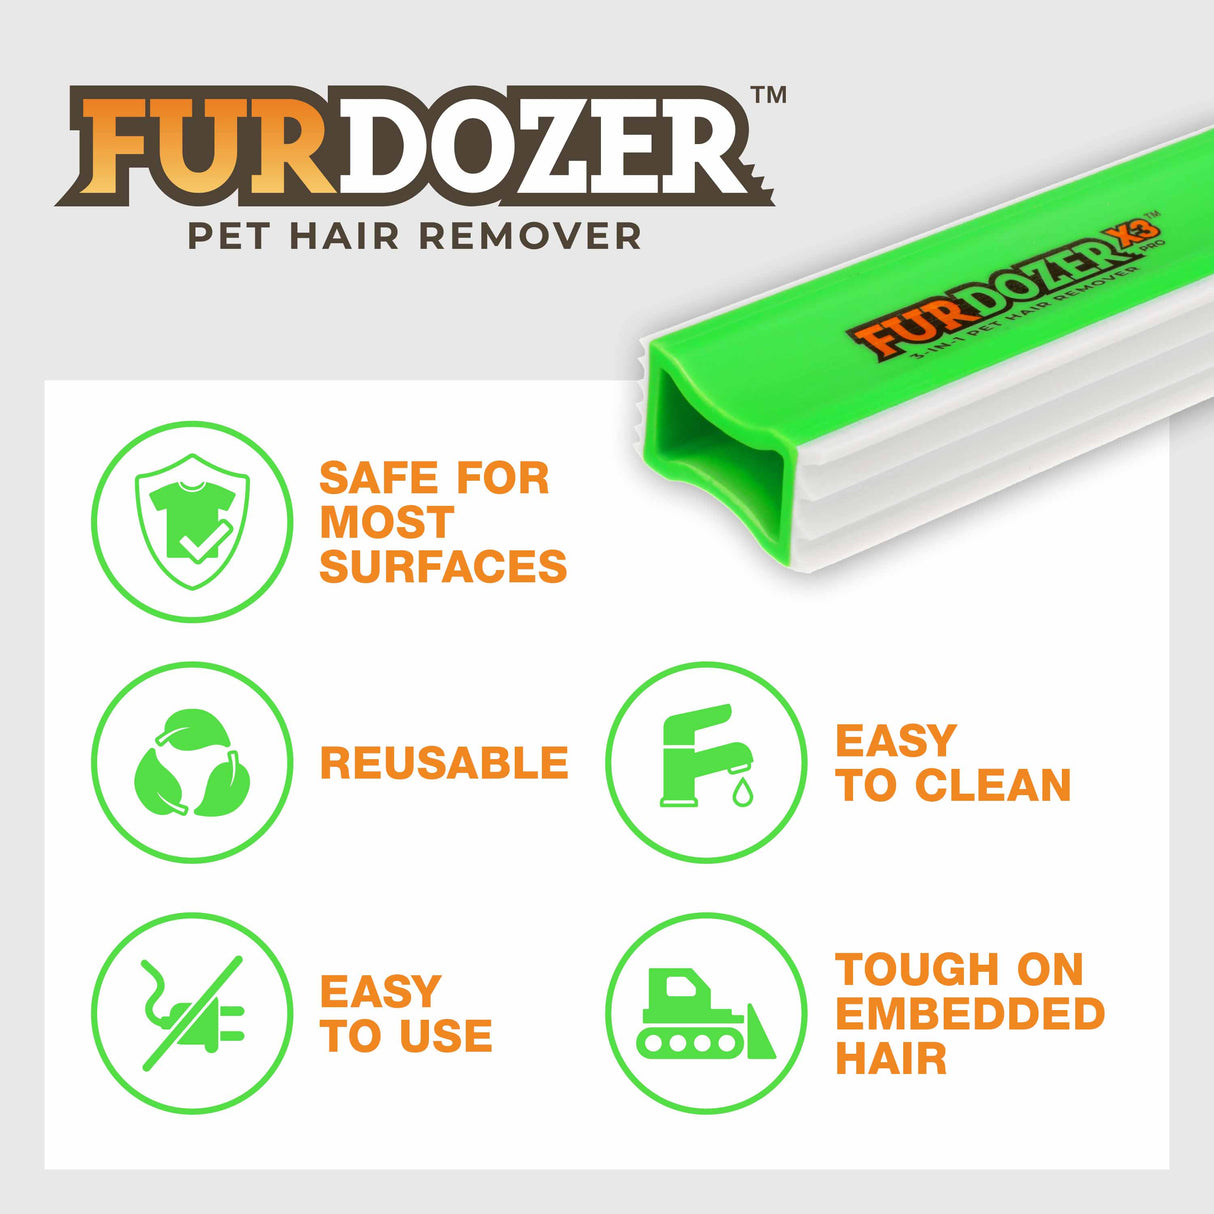 A list of benefits of using FurDozer X3. Those benefits include safe for all fabrics, reusable, easy to clean, easy to use, and tough on embedded hair.